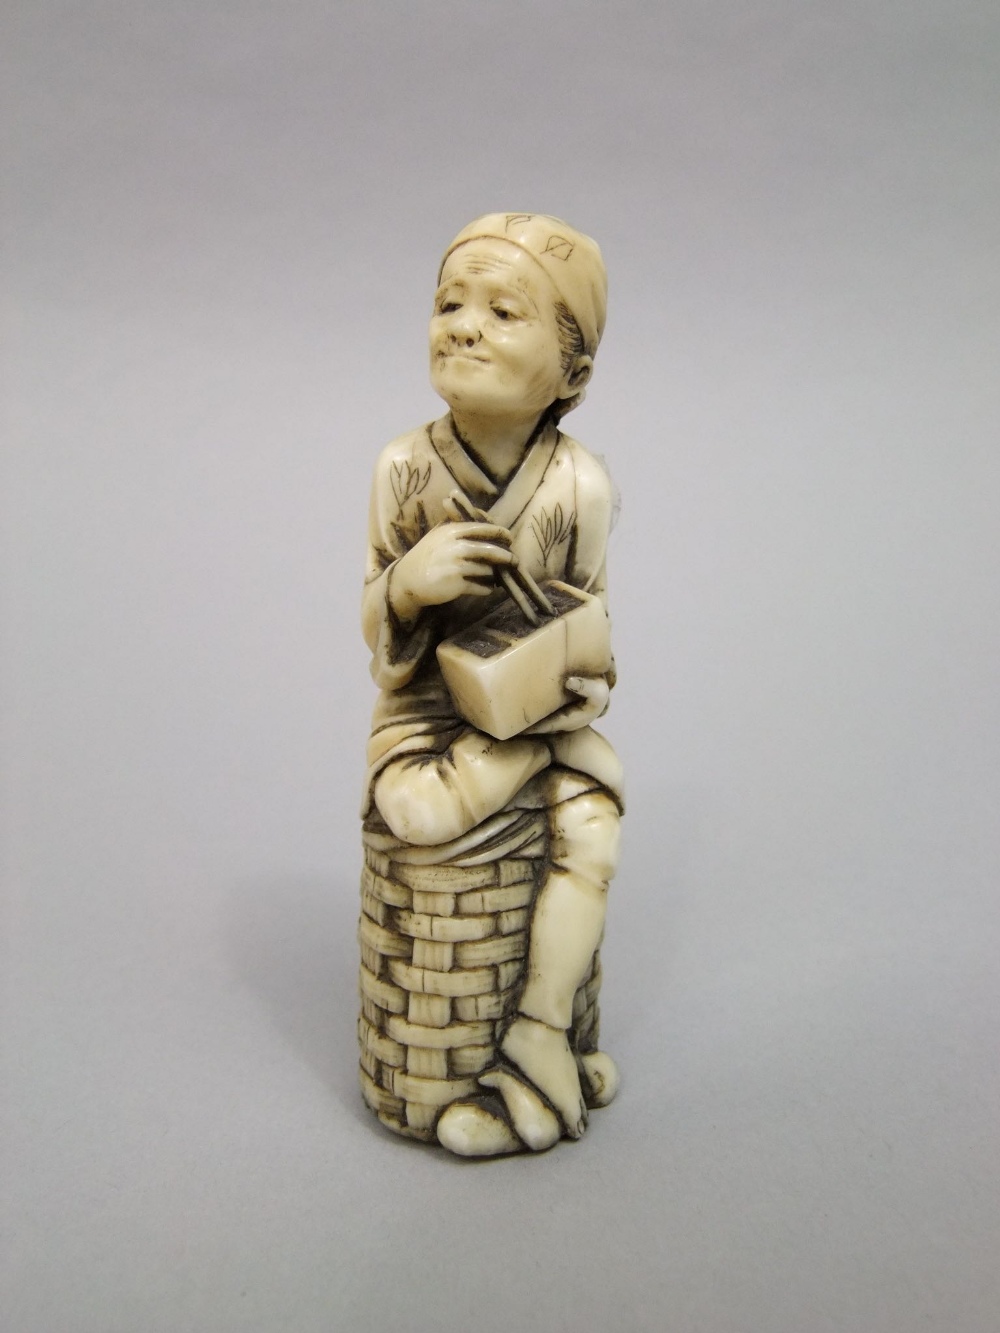 An old Japanese ivory figure of a man, eating with chop sticks while seated on a basket, 10 cm